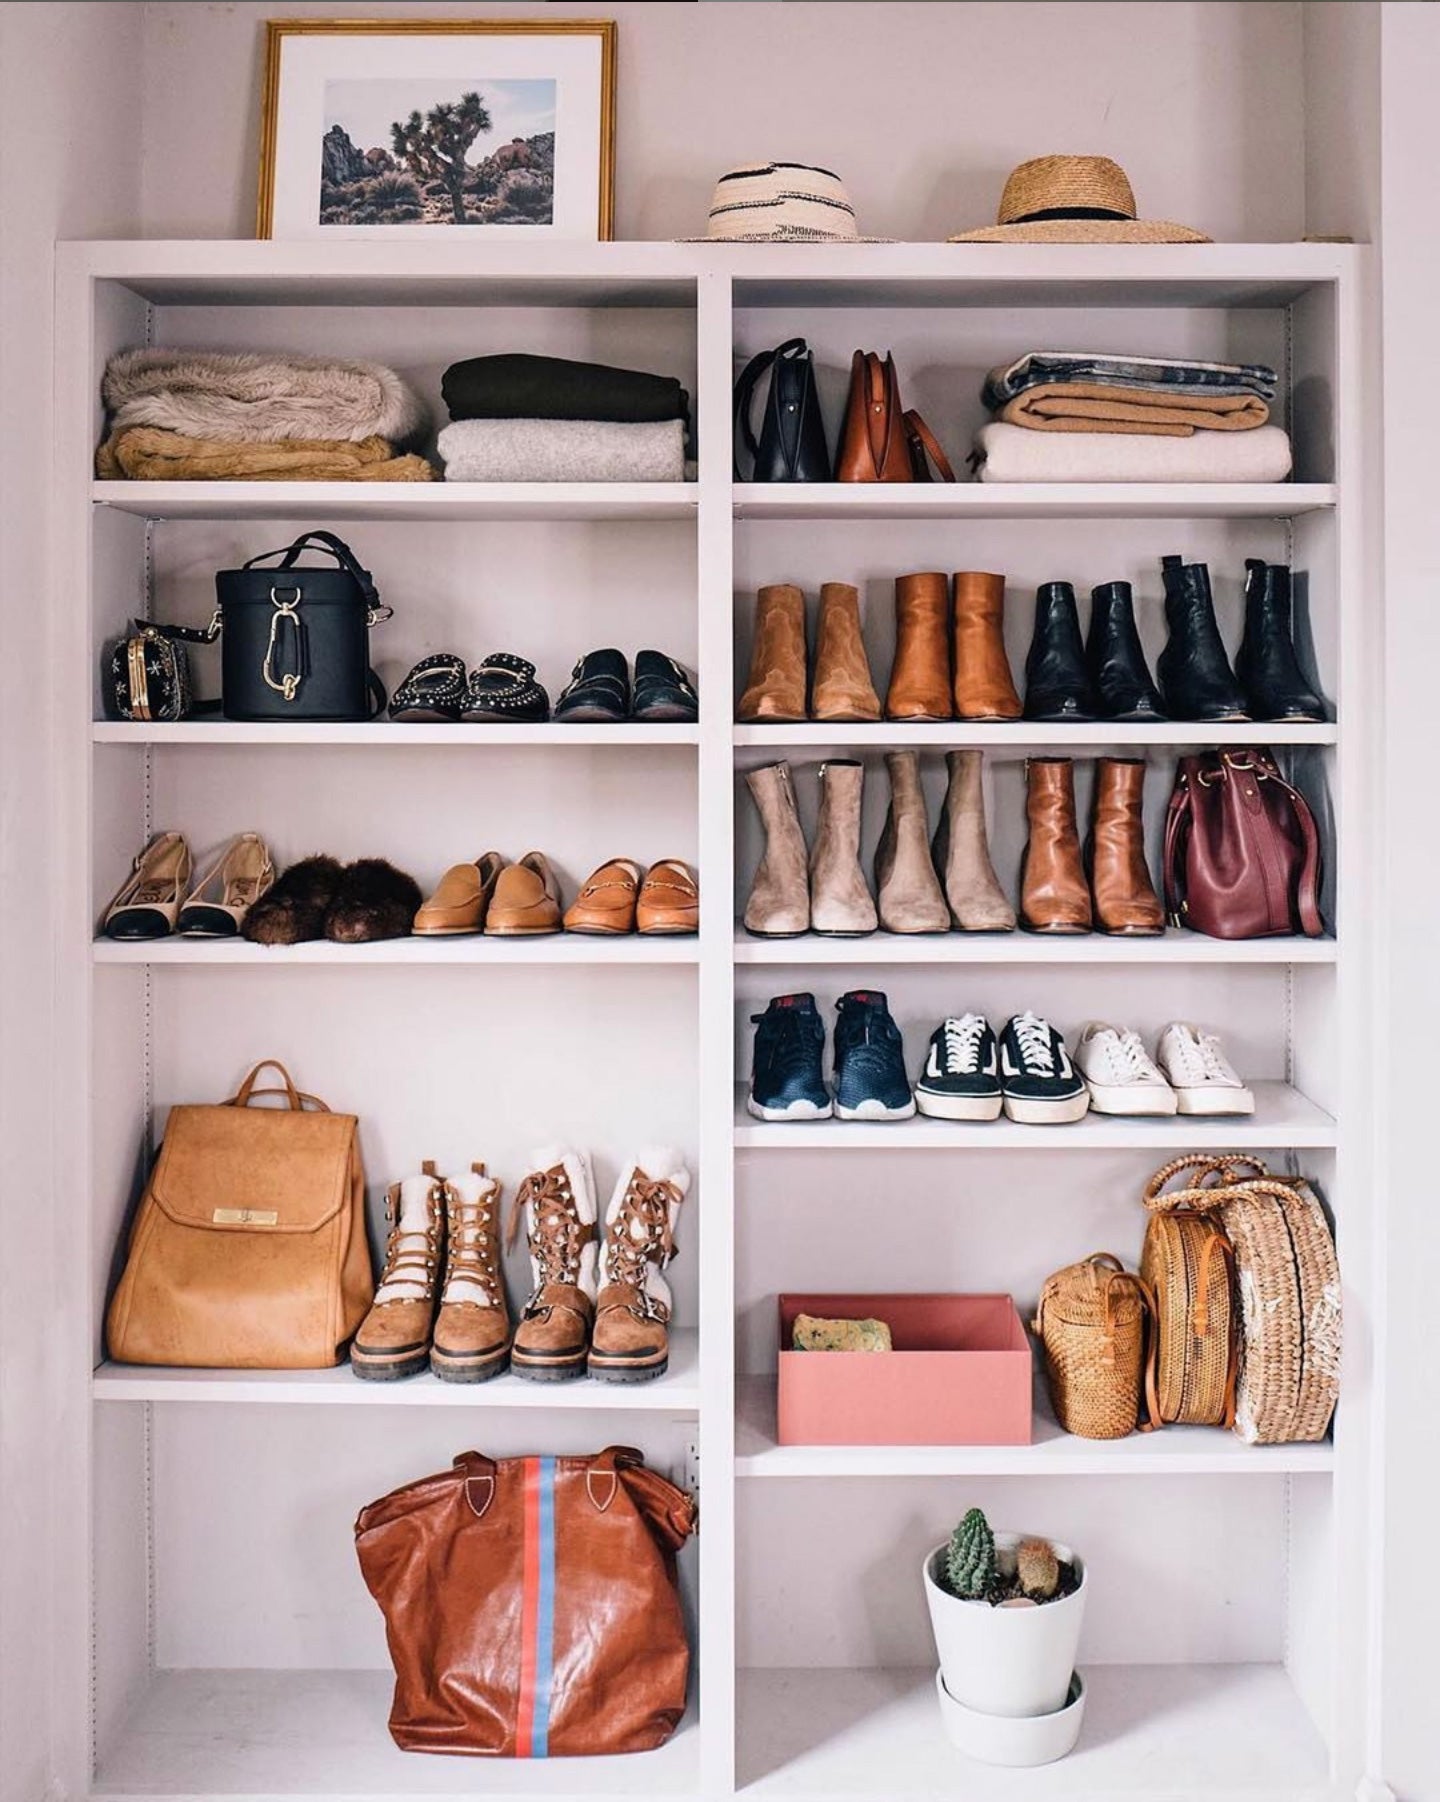 @jessannkirby Instagram - Learn How to Build a Capsule Wardrobe & Create a Stylish Outfit in One-Minute ⏰